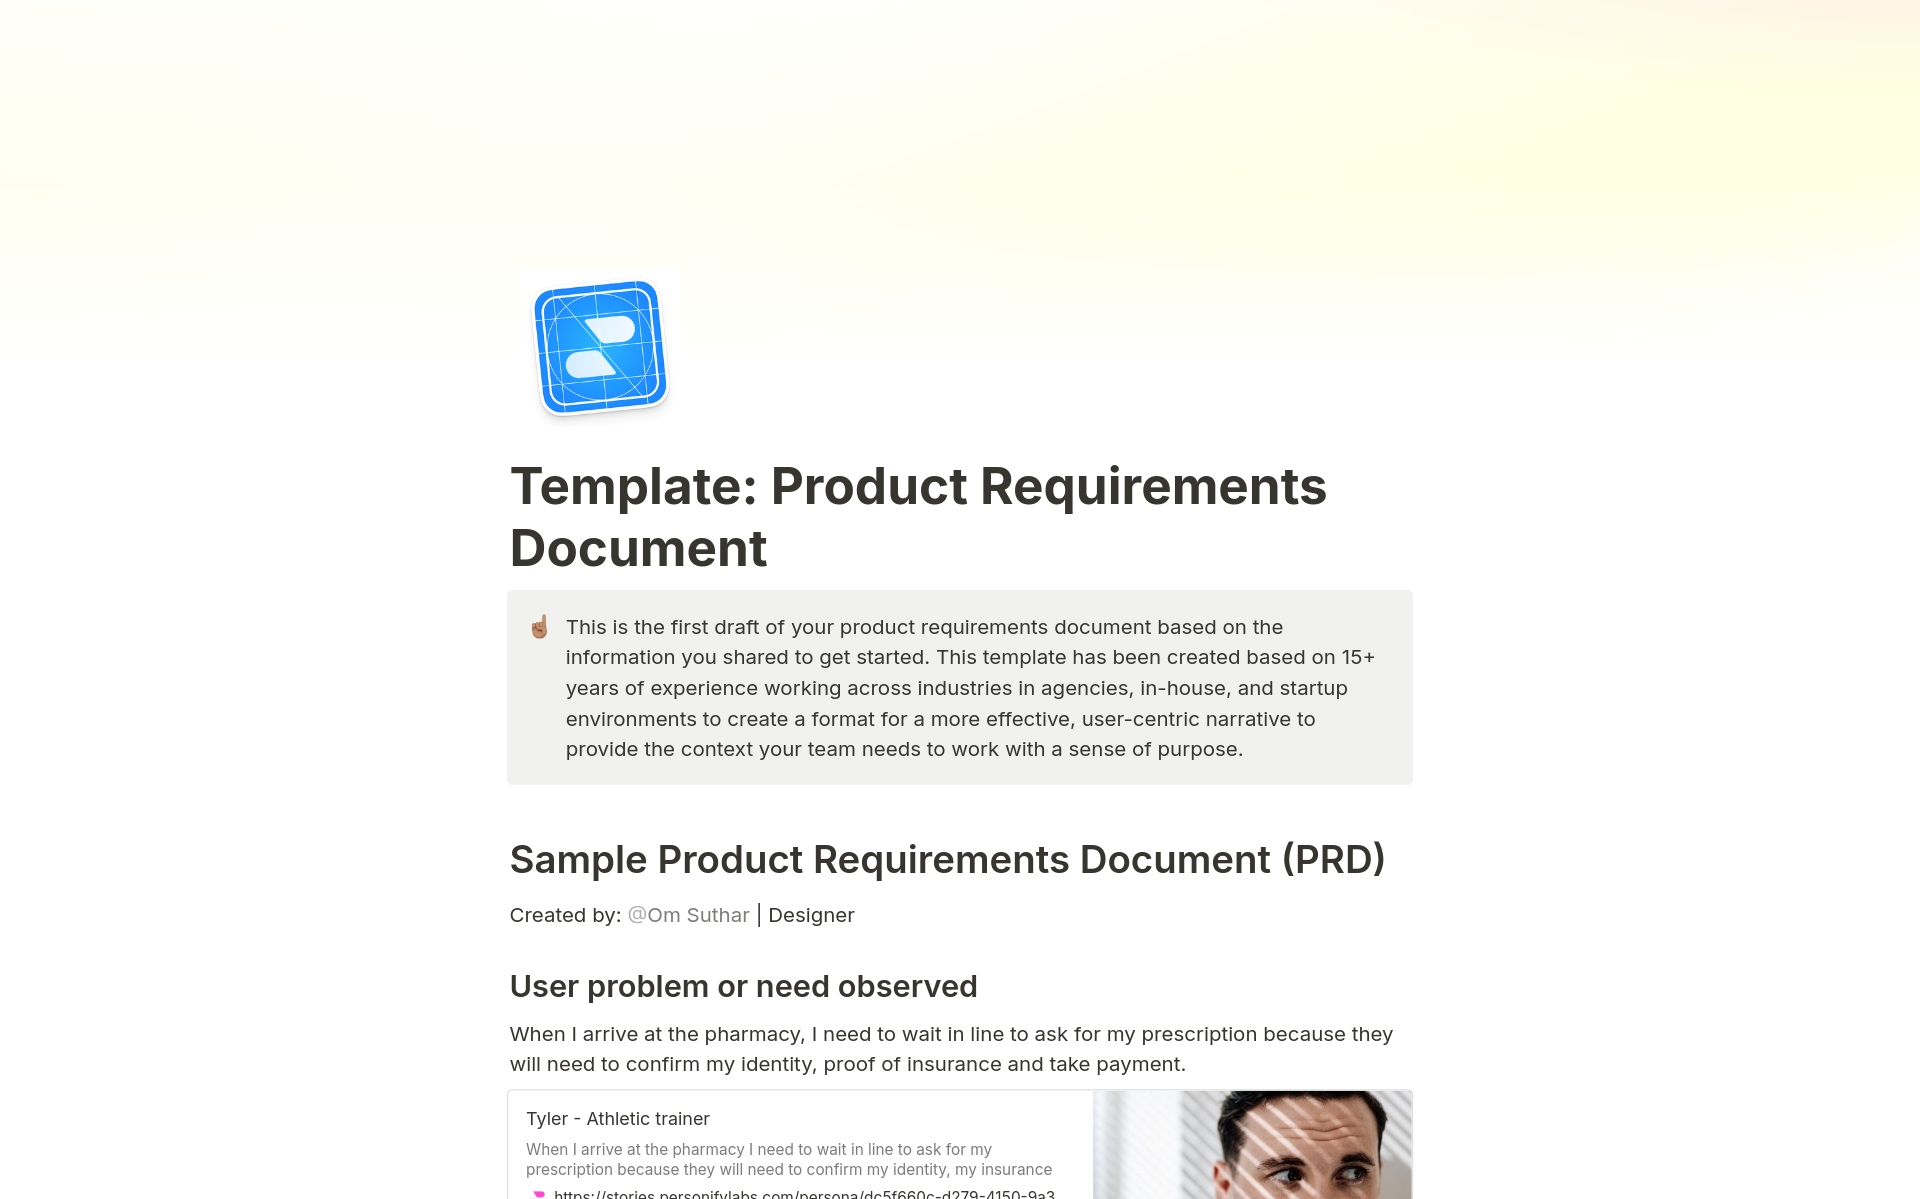 A simple, user-centric blueprint for a product requirements document that starts with an observed user problem or need to set the context for a clear hypothesis, core features of how it works and select value metrics for measuring impact of your feature or experiment.